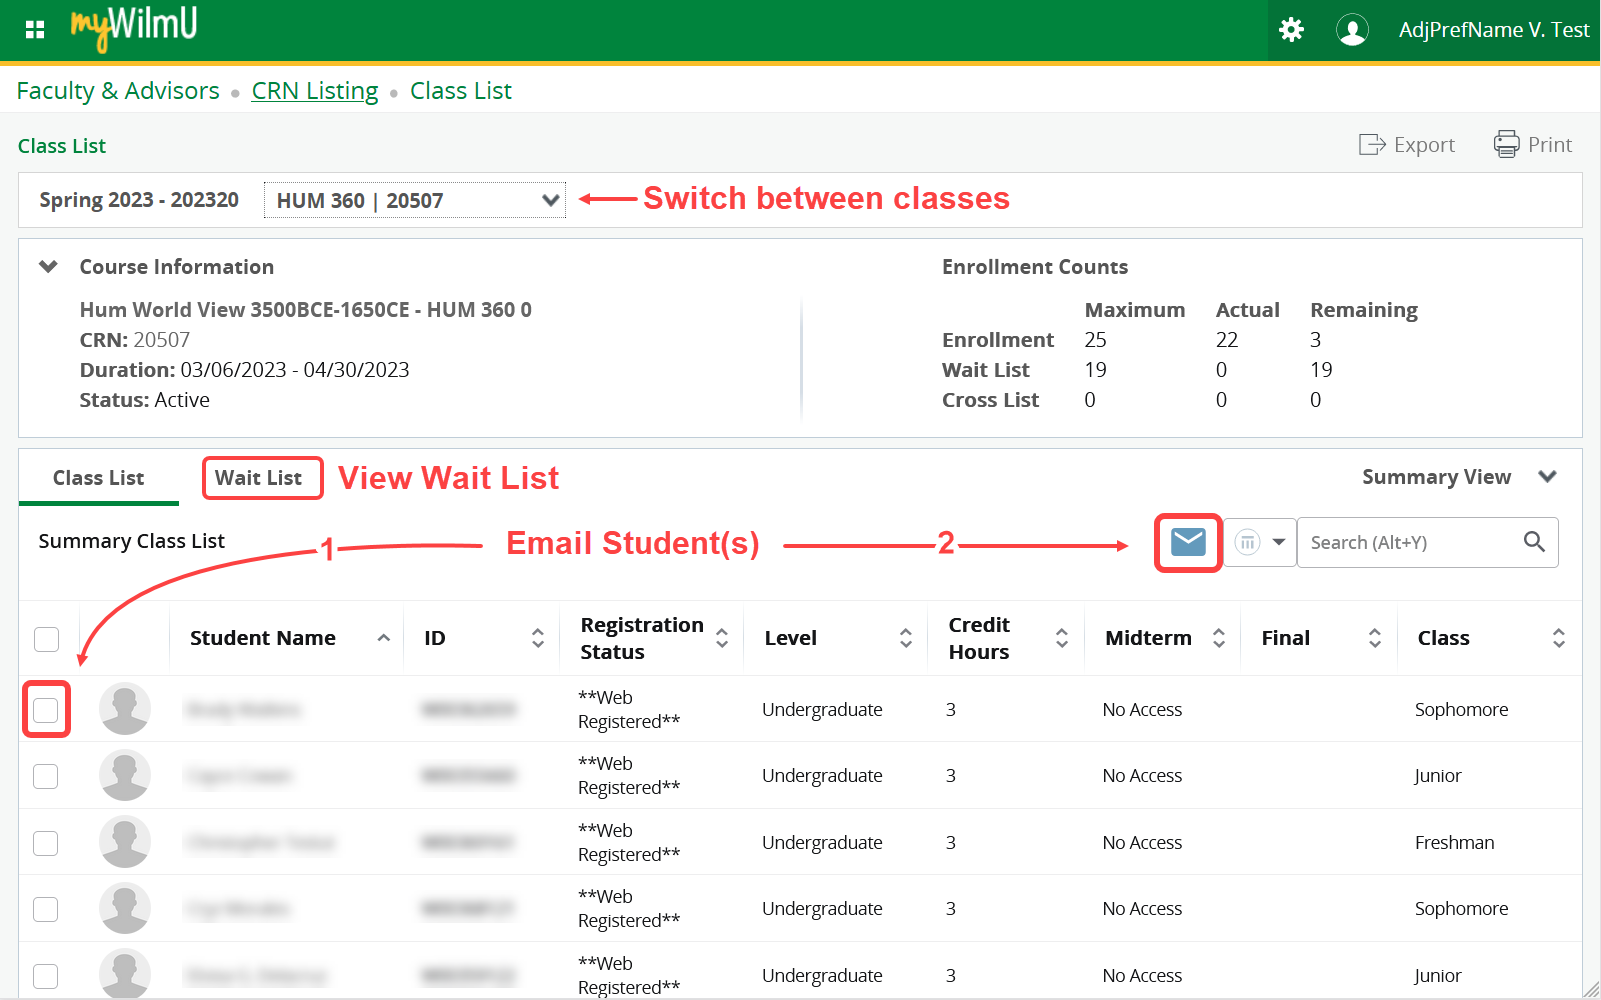 Class List page in Faculty Self-Service